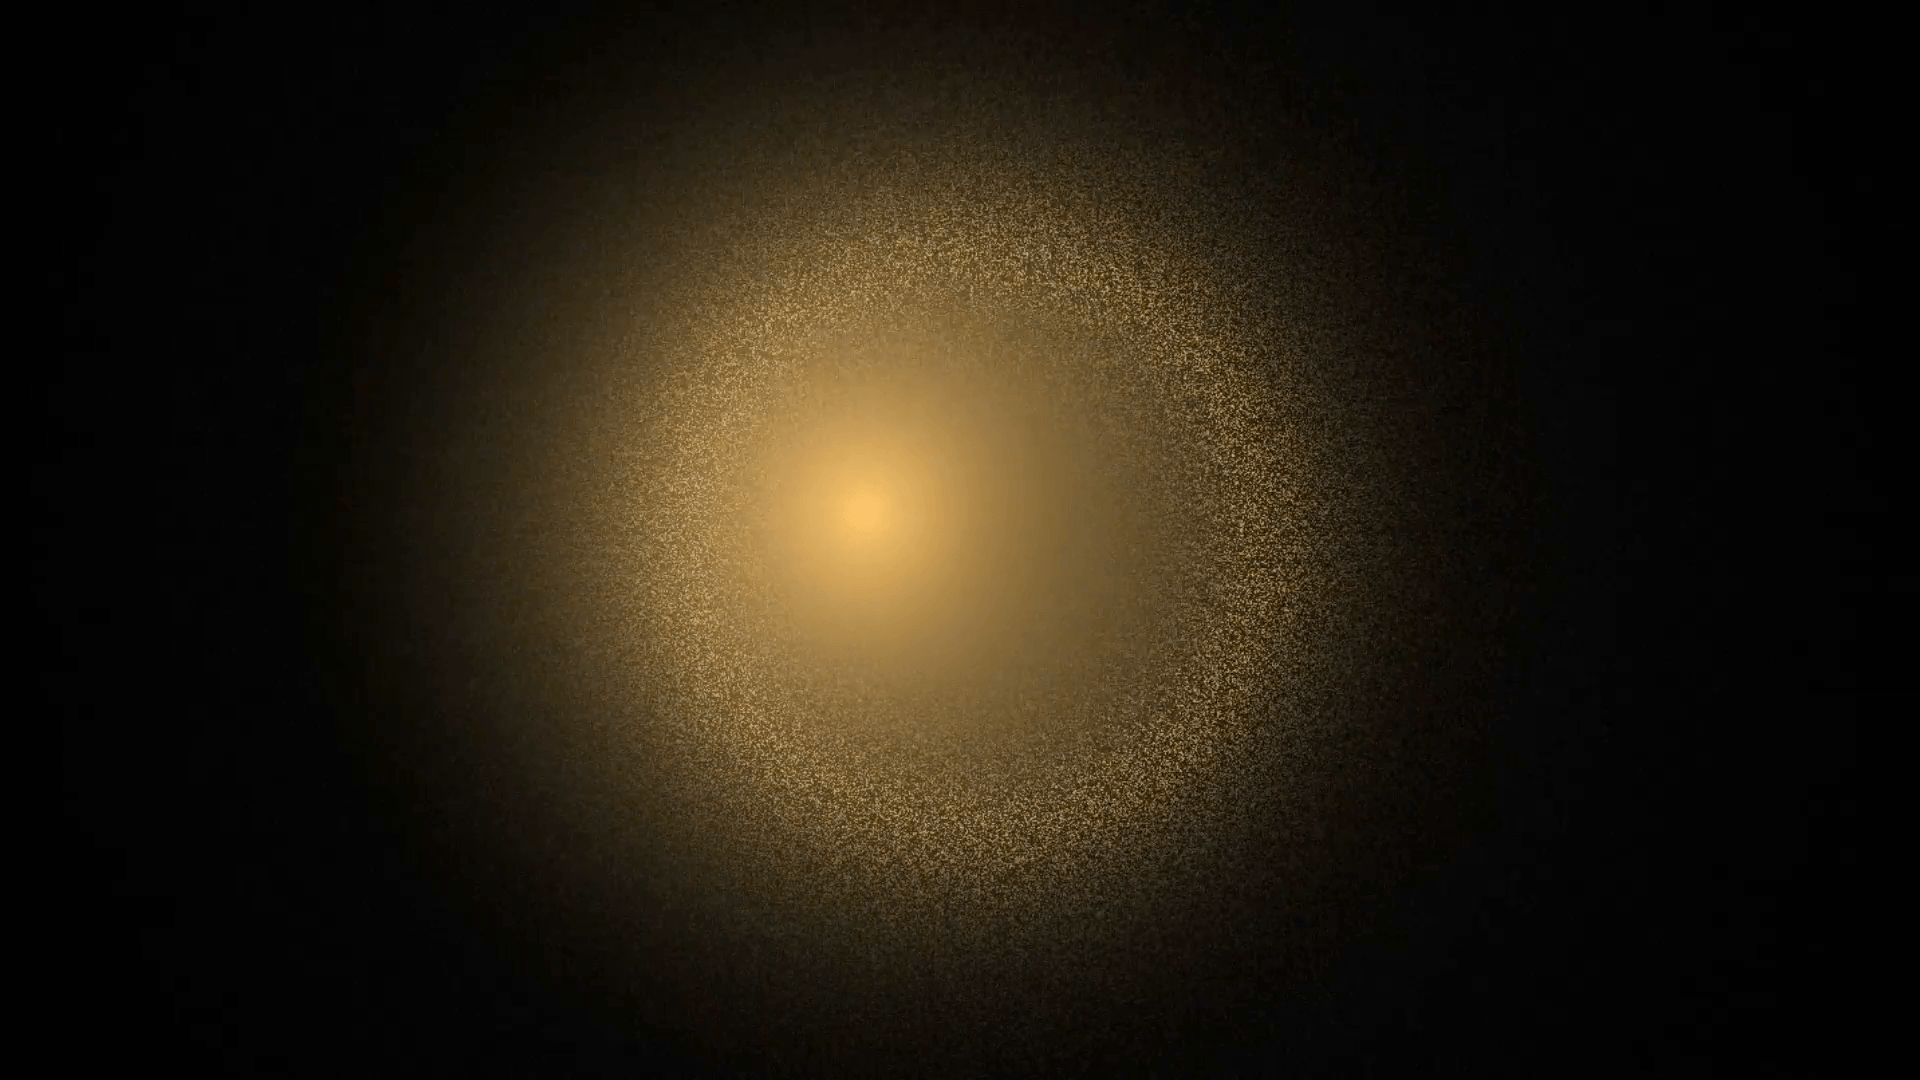 Golden sand in rotational motion with light, metallic yellow gold